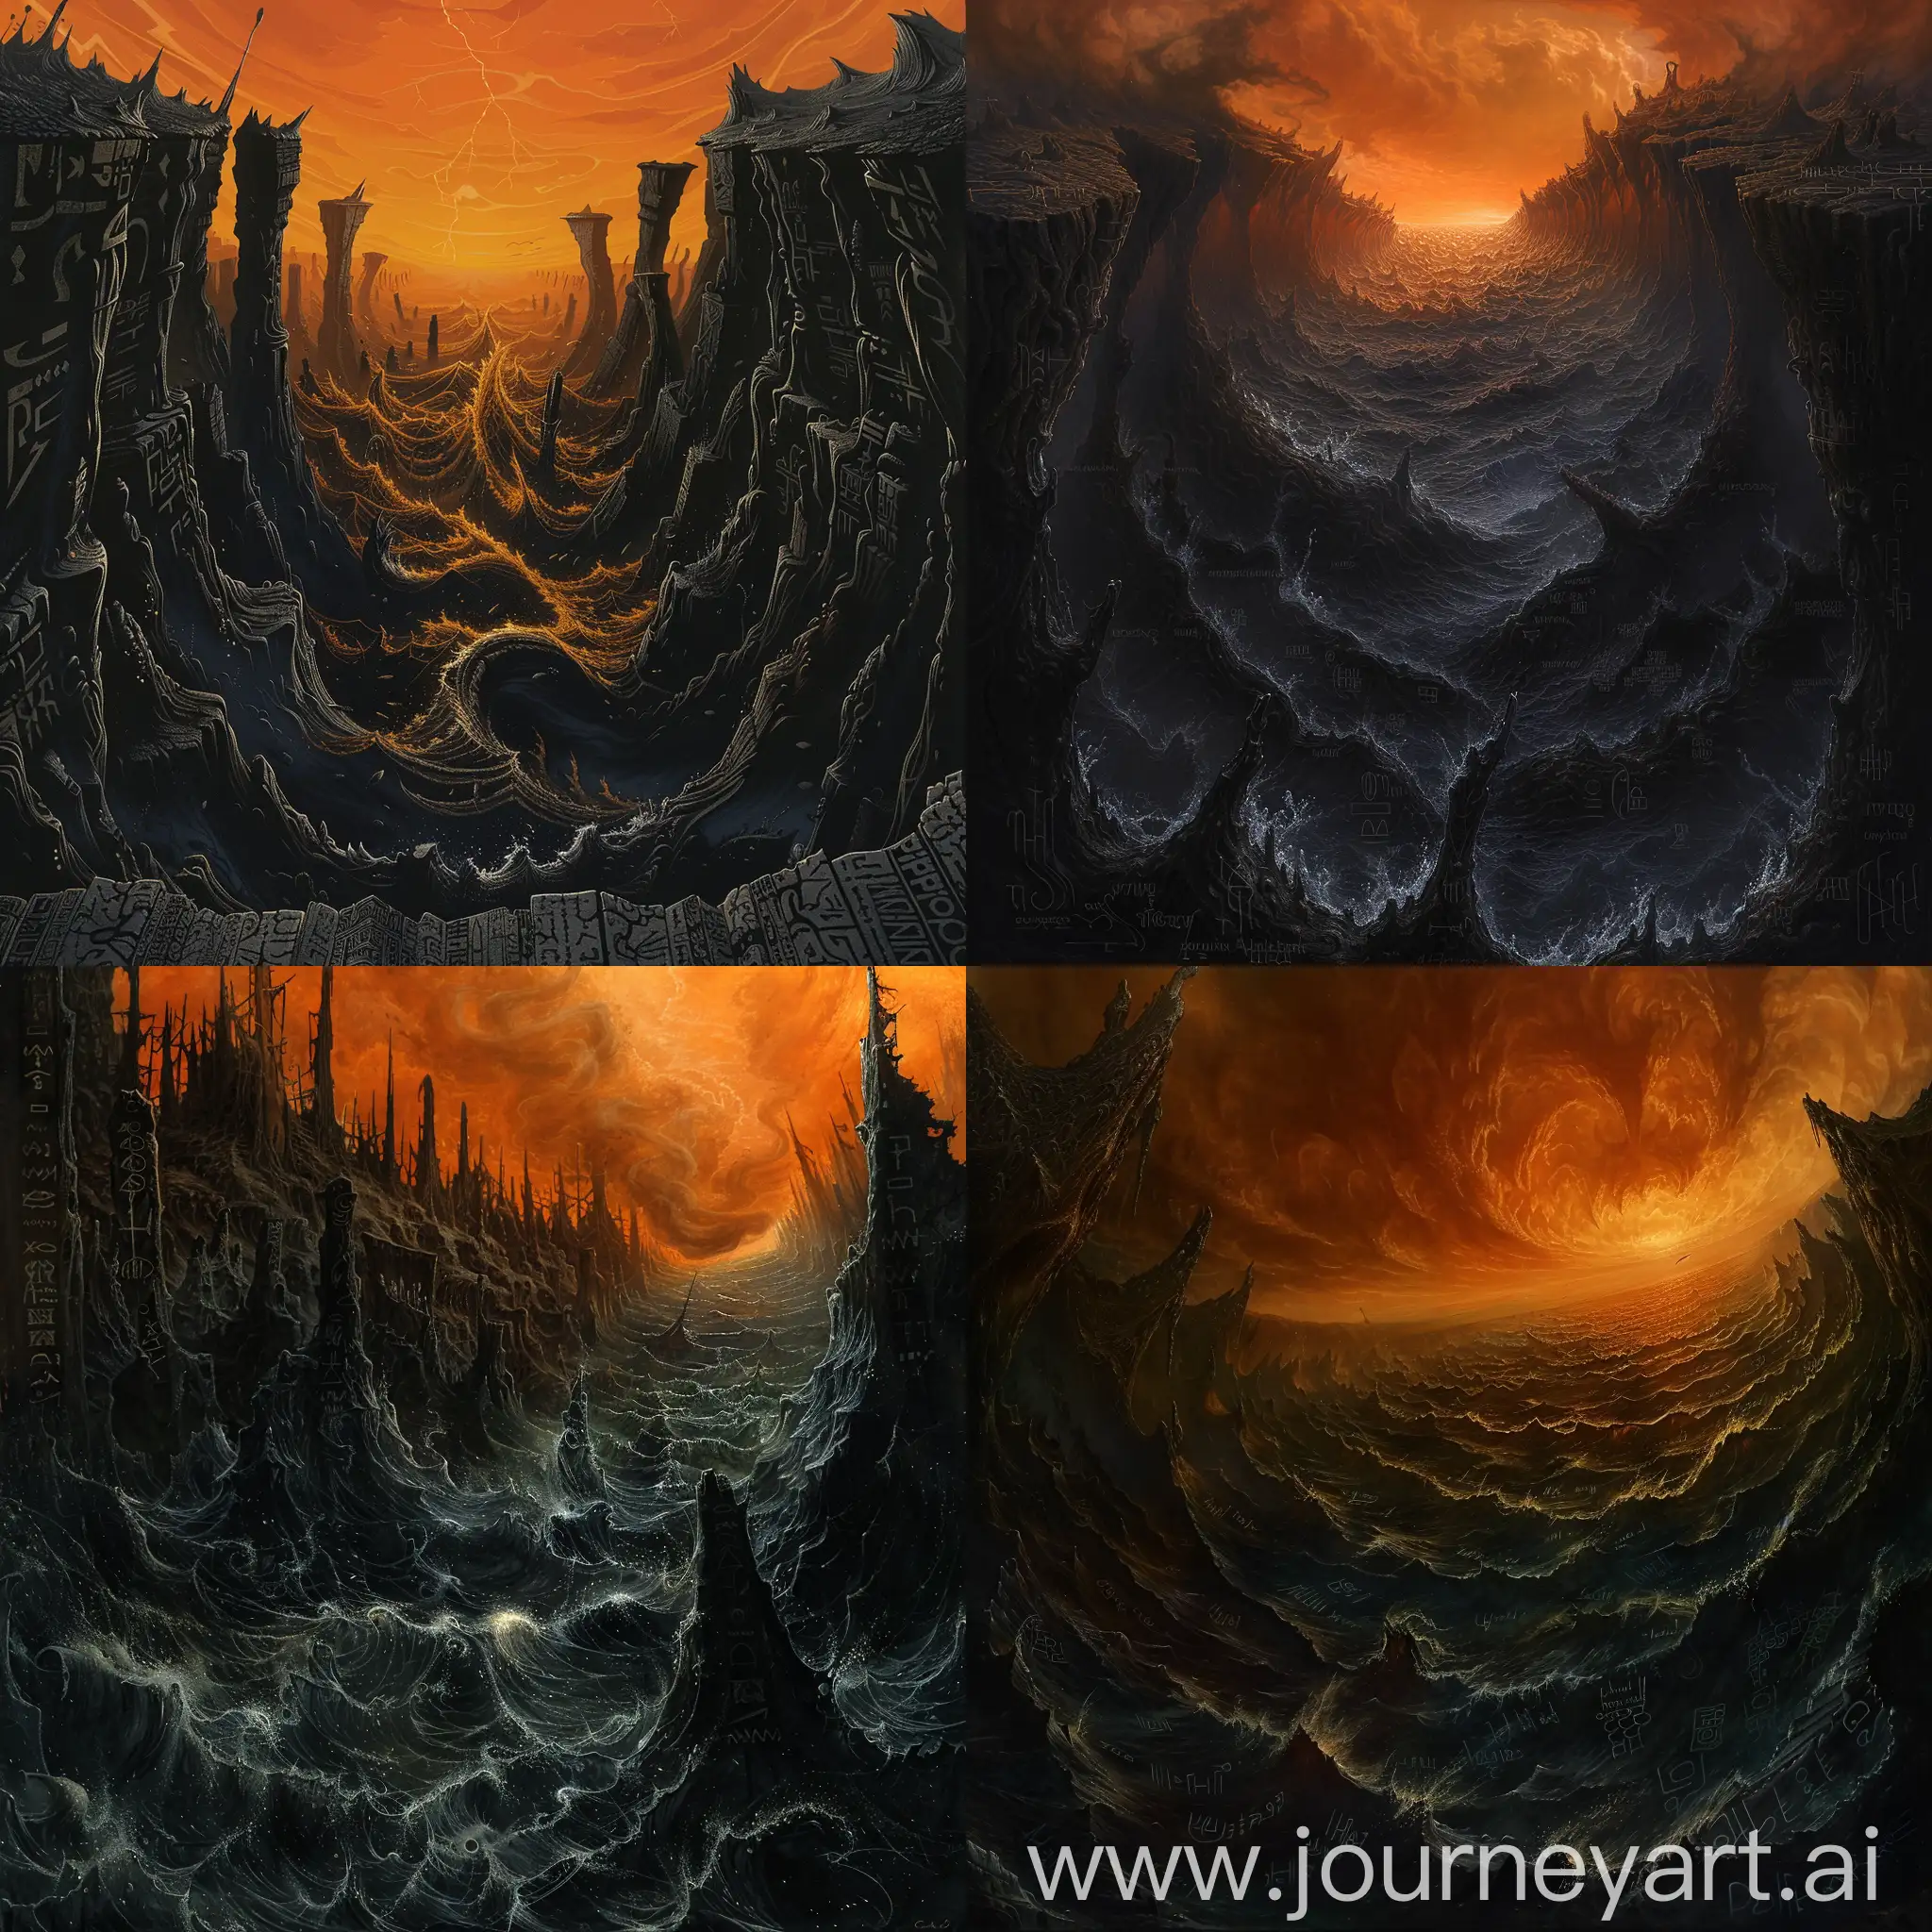 A vast inverted landscape opens below, stretching farther than the eye can see. Where ground should be, a dark churning sea roils and bubbles, lit from within by an eerie glow. Rising from the ink-black waves are twisted rocky formations like grasping fingers clawing towards an ominous orange sky. Wispy shades drift upon spectral winds, their featureless forms etched against the turbulent backdrop. Runes and glyphs in long-forgotten tongues cover cliffs impossibly suspended above the roiling abyss. An ambient drone rises and falls, a wordless lament on the edge of hearing. Mystery and complexity lurk beneath layers of suggestion, leaving perception to wander amid haunting vistas that probe the depths of dark realms known only in fever dreams.